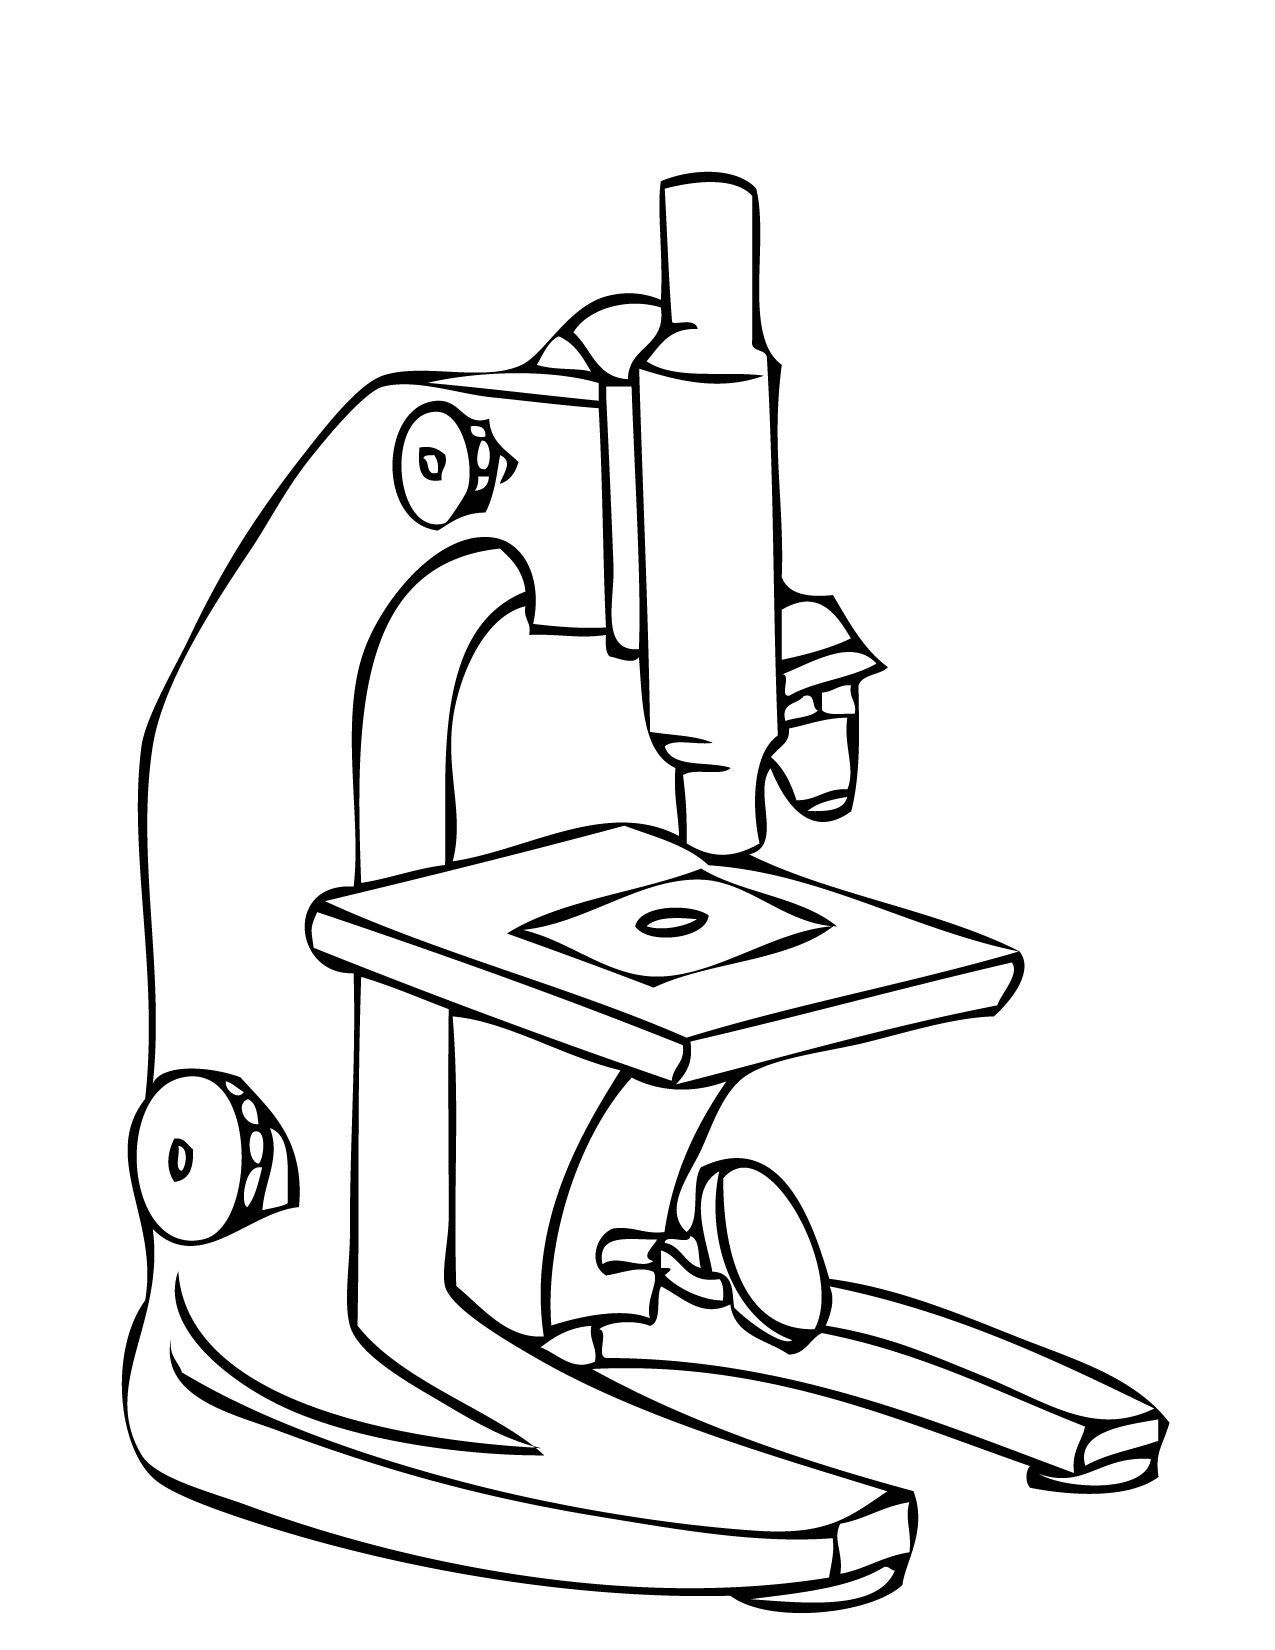 Microscope drawing free download clip art on